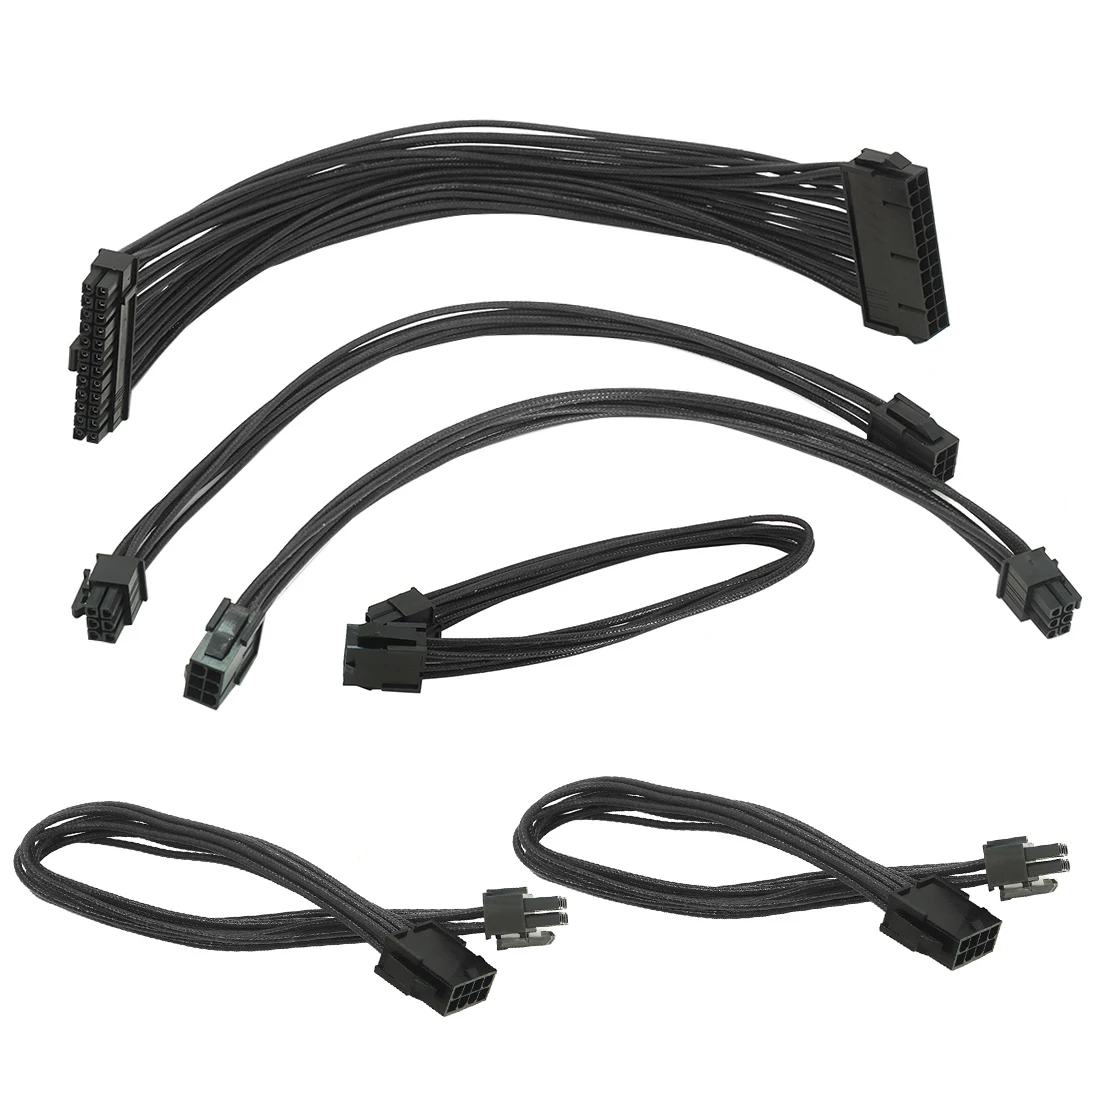 

XT-XINTE Basic Sleeved Extension Cable Kit ATX 24Pin/ EPS 4+4Pin / PCI-E 6+2Pin PCI-E 6Pin Power Supply nylon Cable for Computer